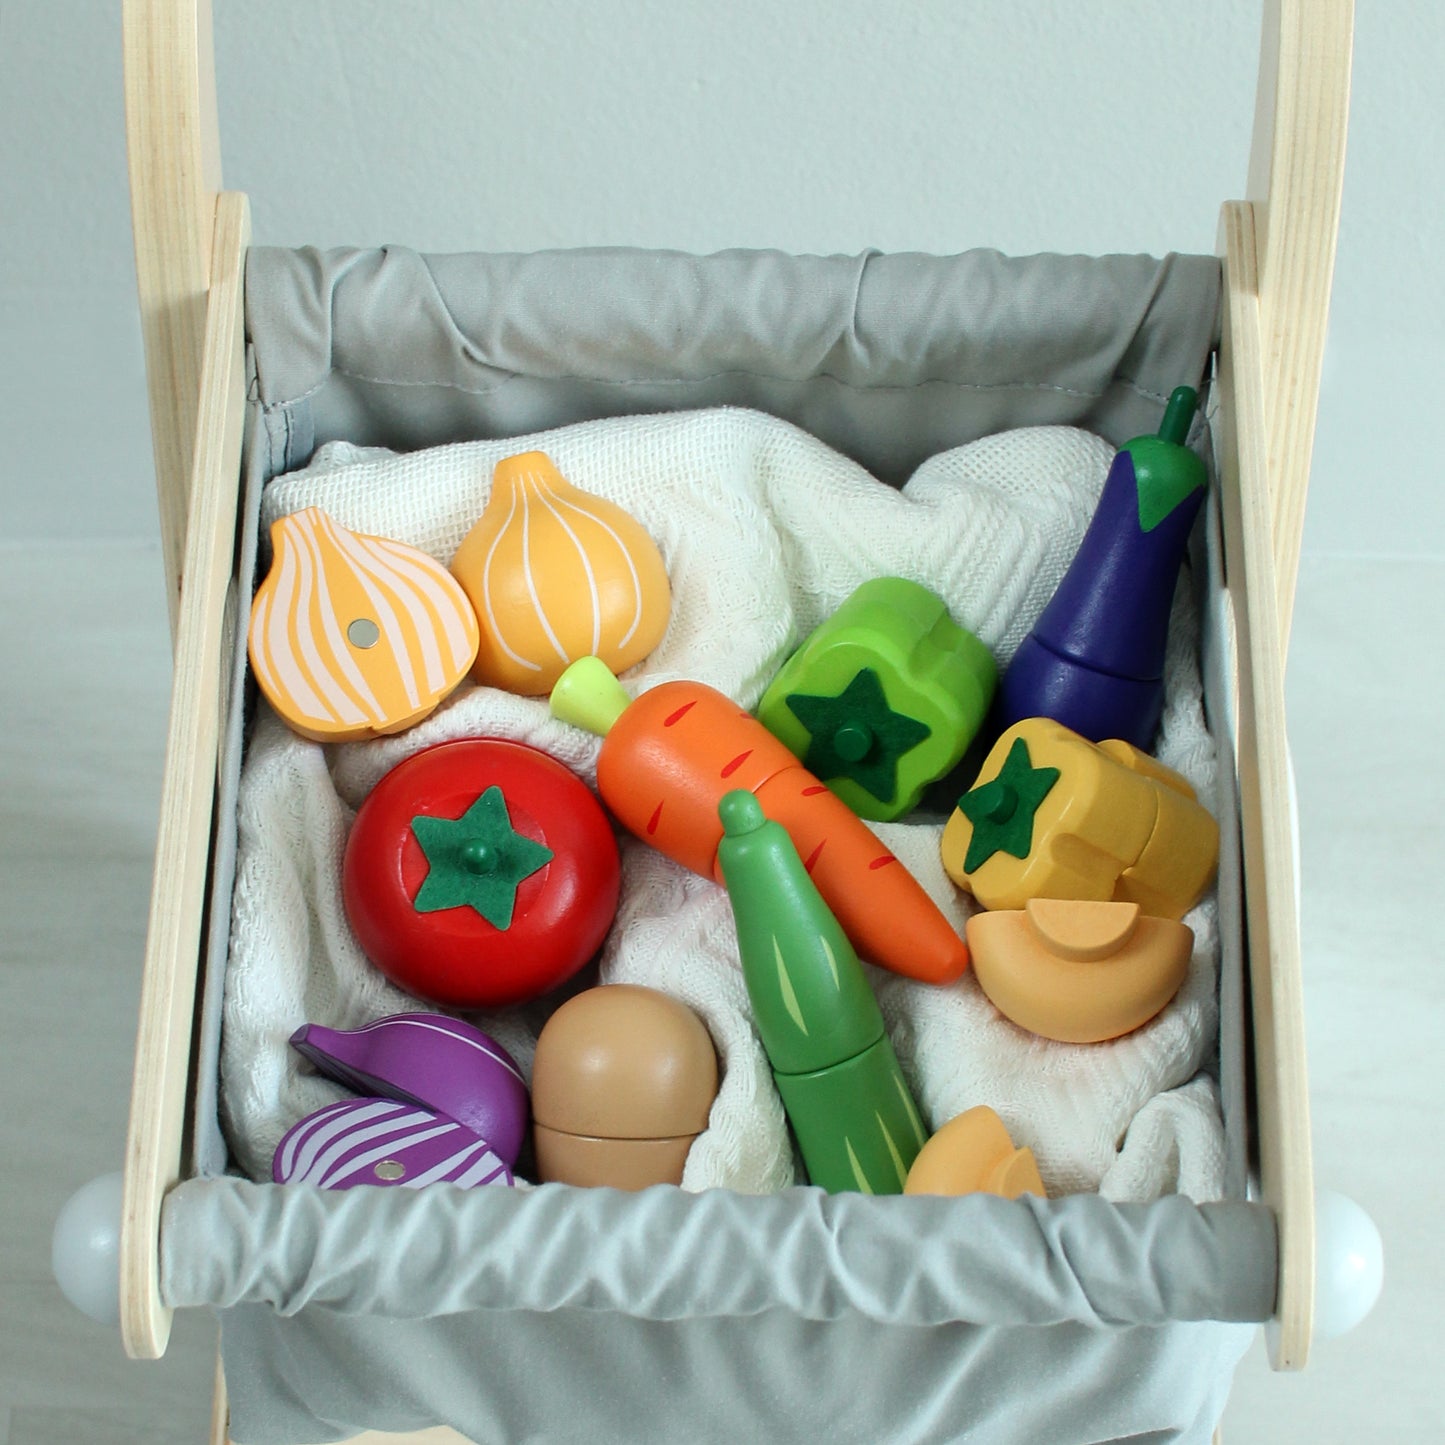 eco friendly colourful wooden vegetables - potato, mushroom, carrot, tomato, onion, eggplant, peppers, cucumber - wooden knife included with tray (cart not included)